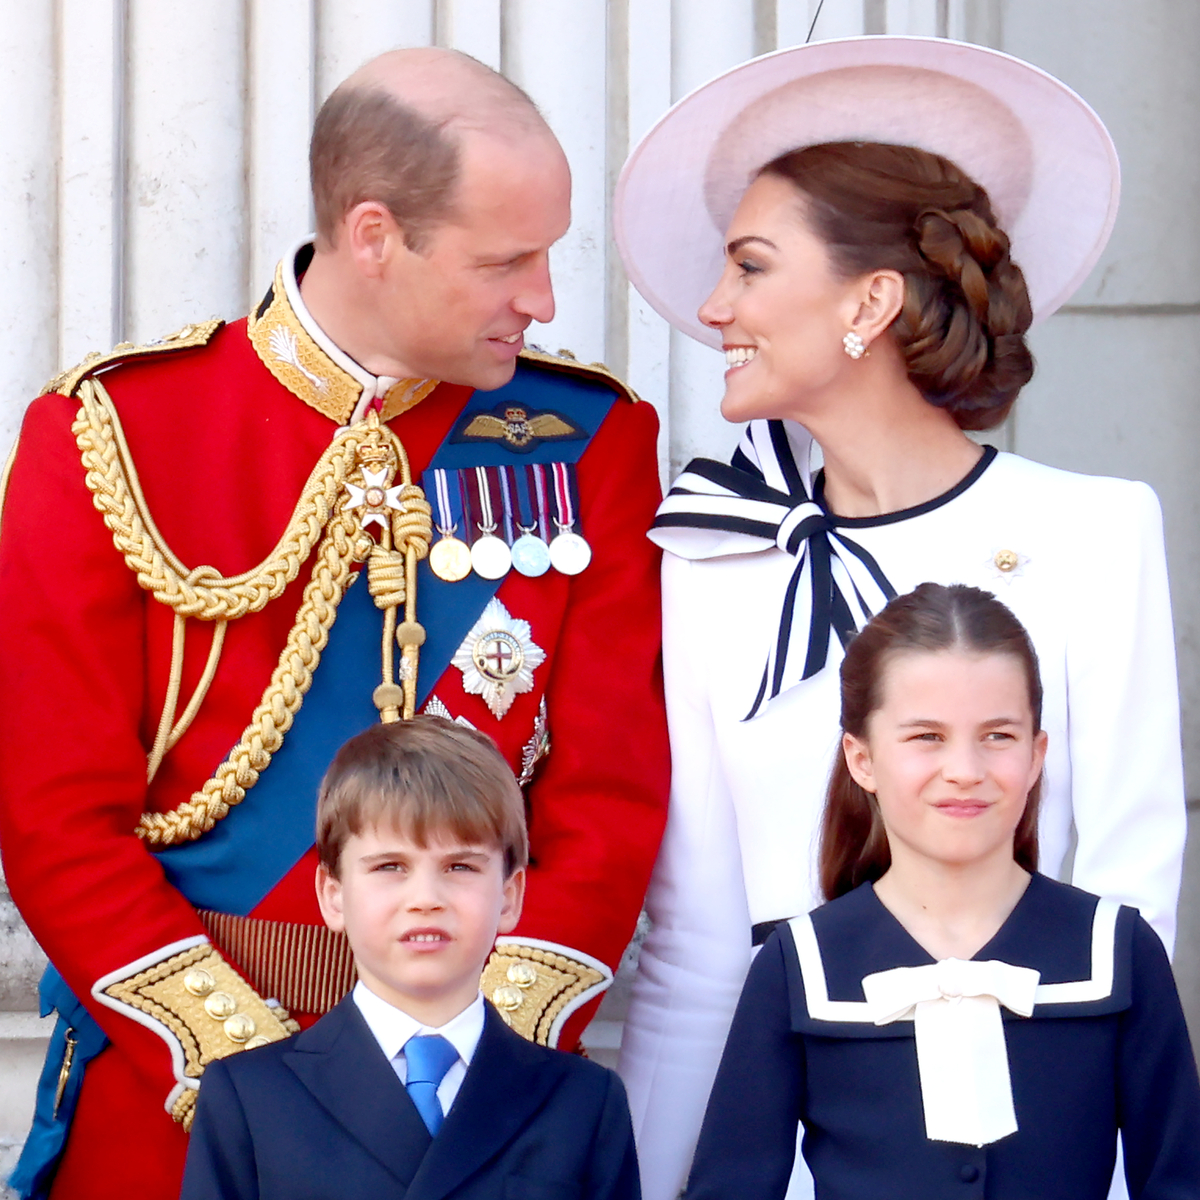 Prince William’s Support for Kate Middleton During Her Health Struggles